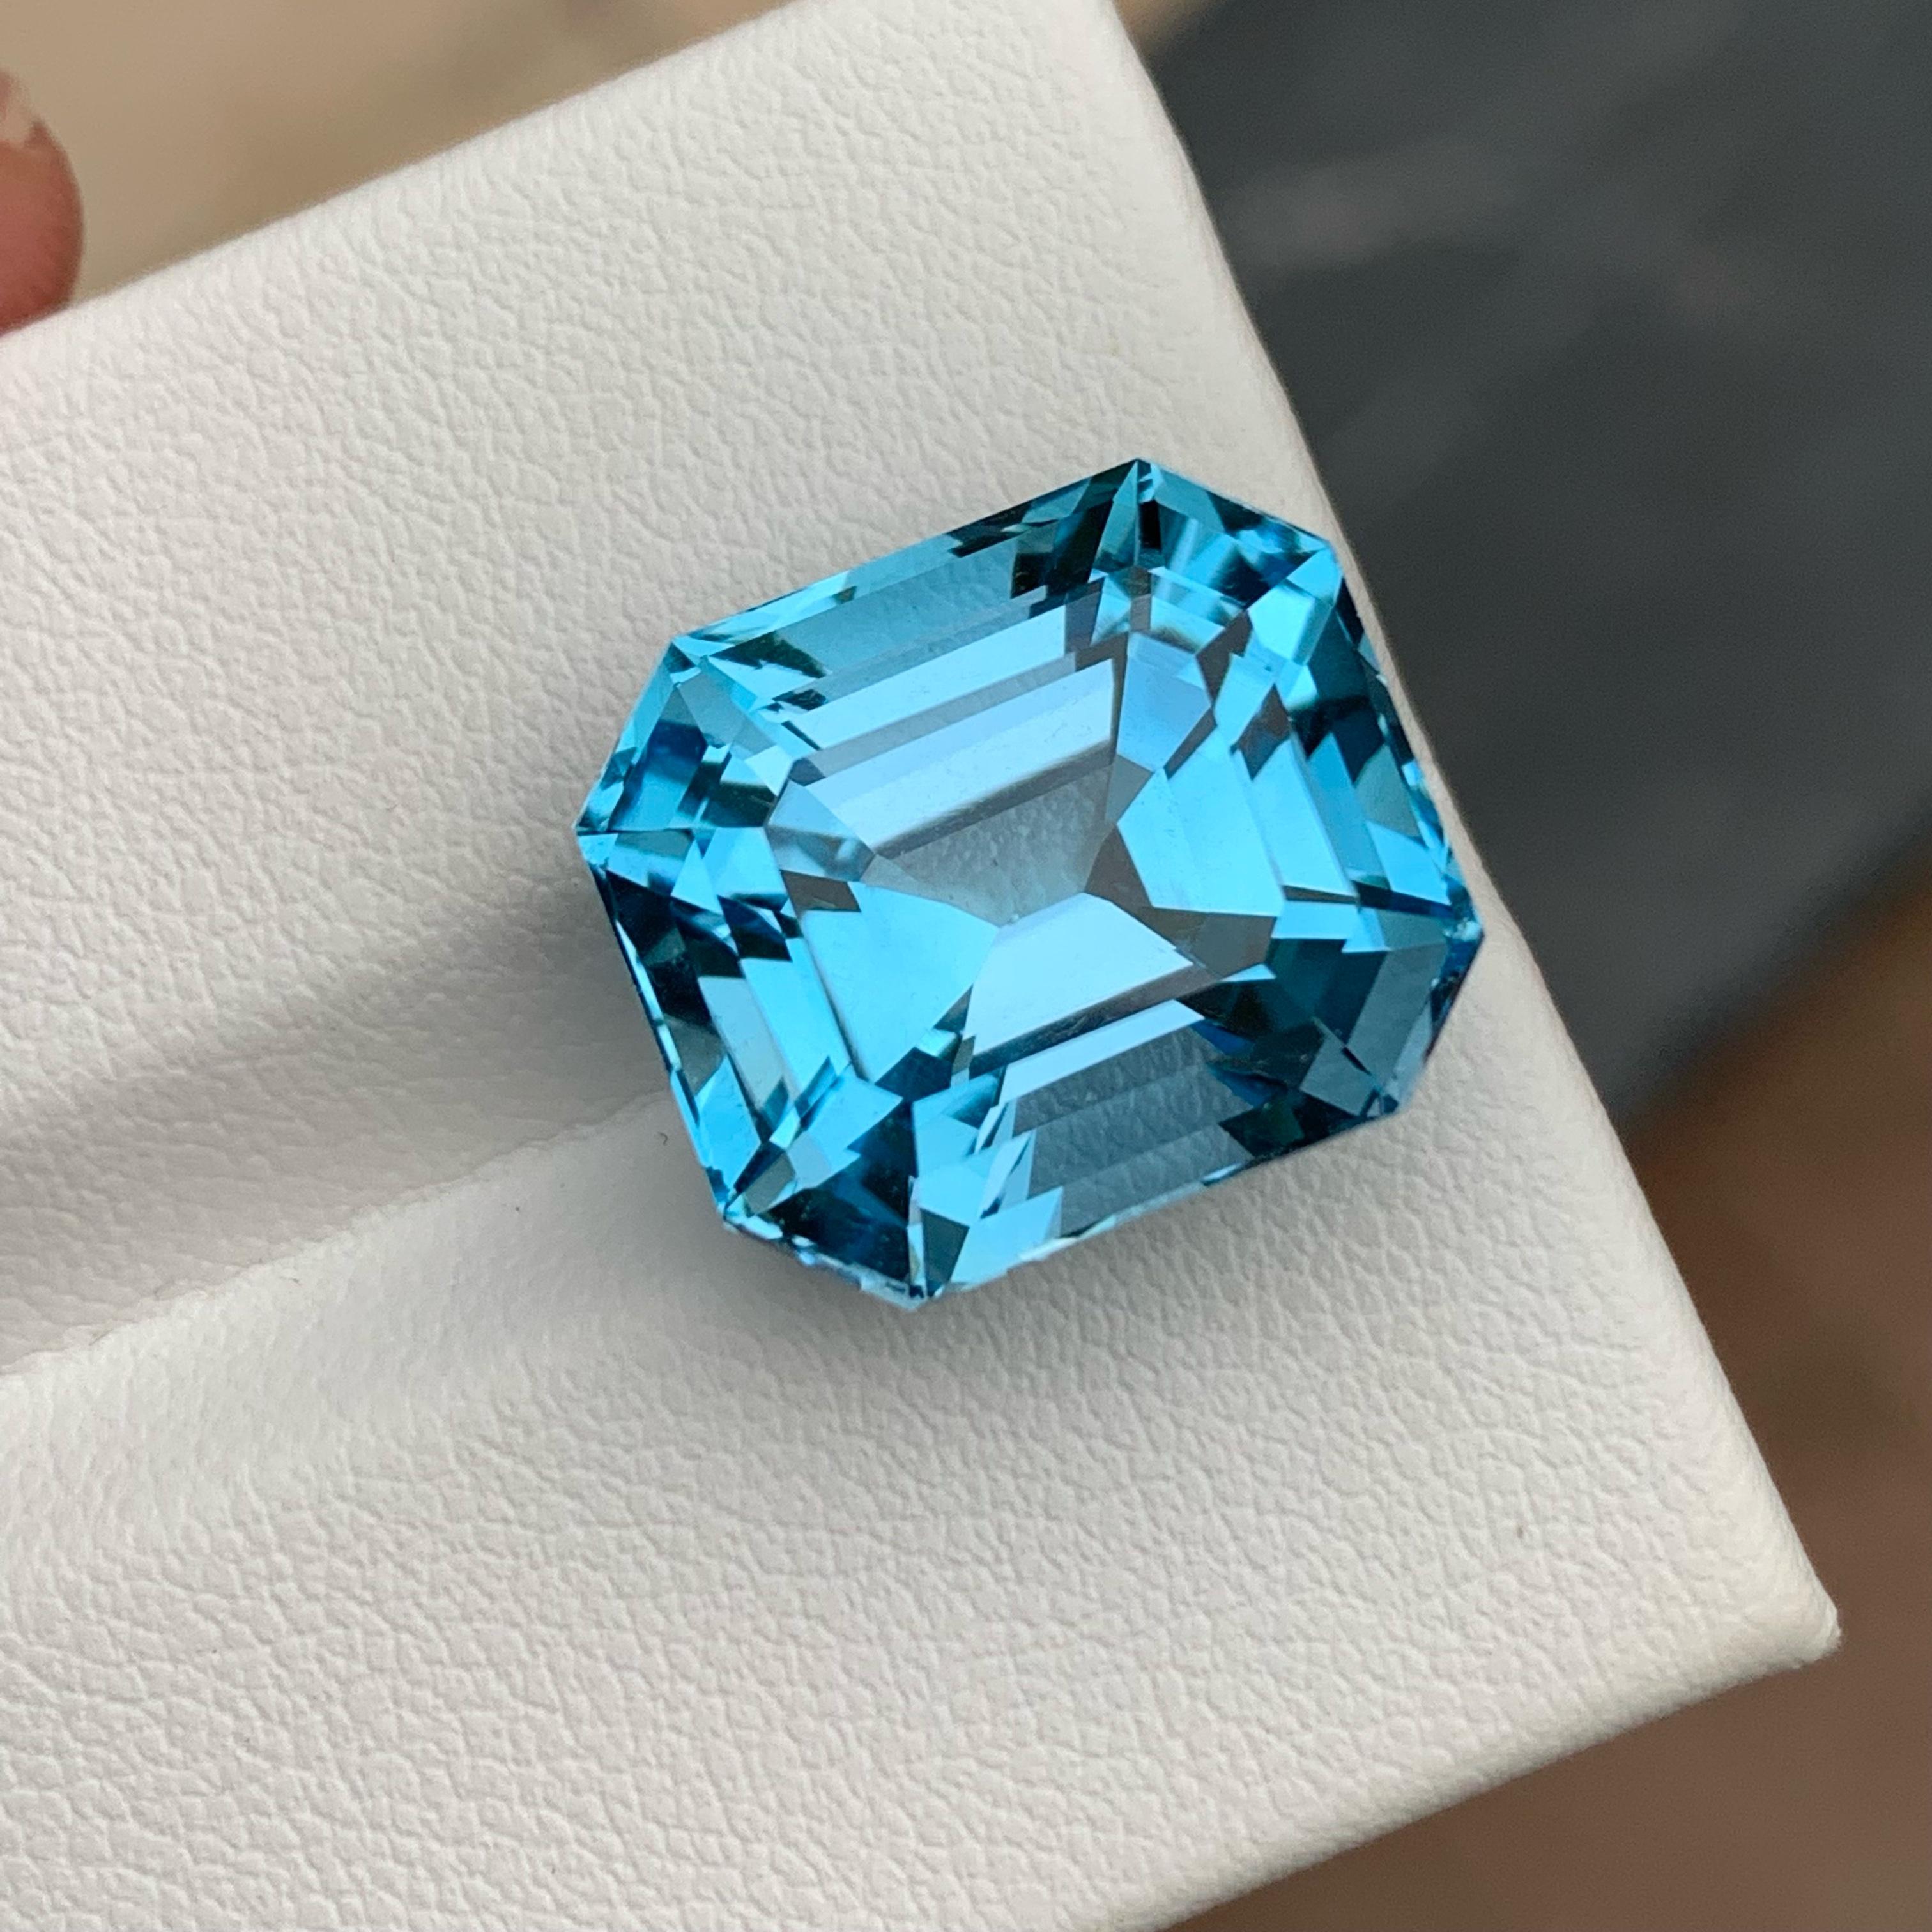 Excellent Swiss Blue Natural Topaz Stone, available for sale at wholesale price natural High Quality, Loupe Clean Clarity, 25.45 carats loose certified topaz gemstone from Africa.

Product Information:
GEMSTONE NAME: Excellent Swiss Blue Natural